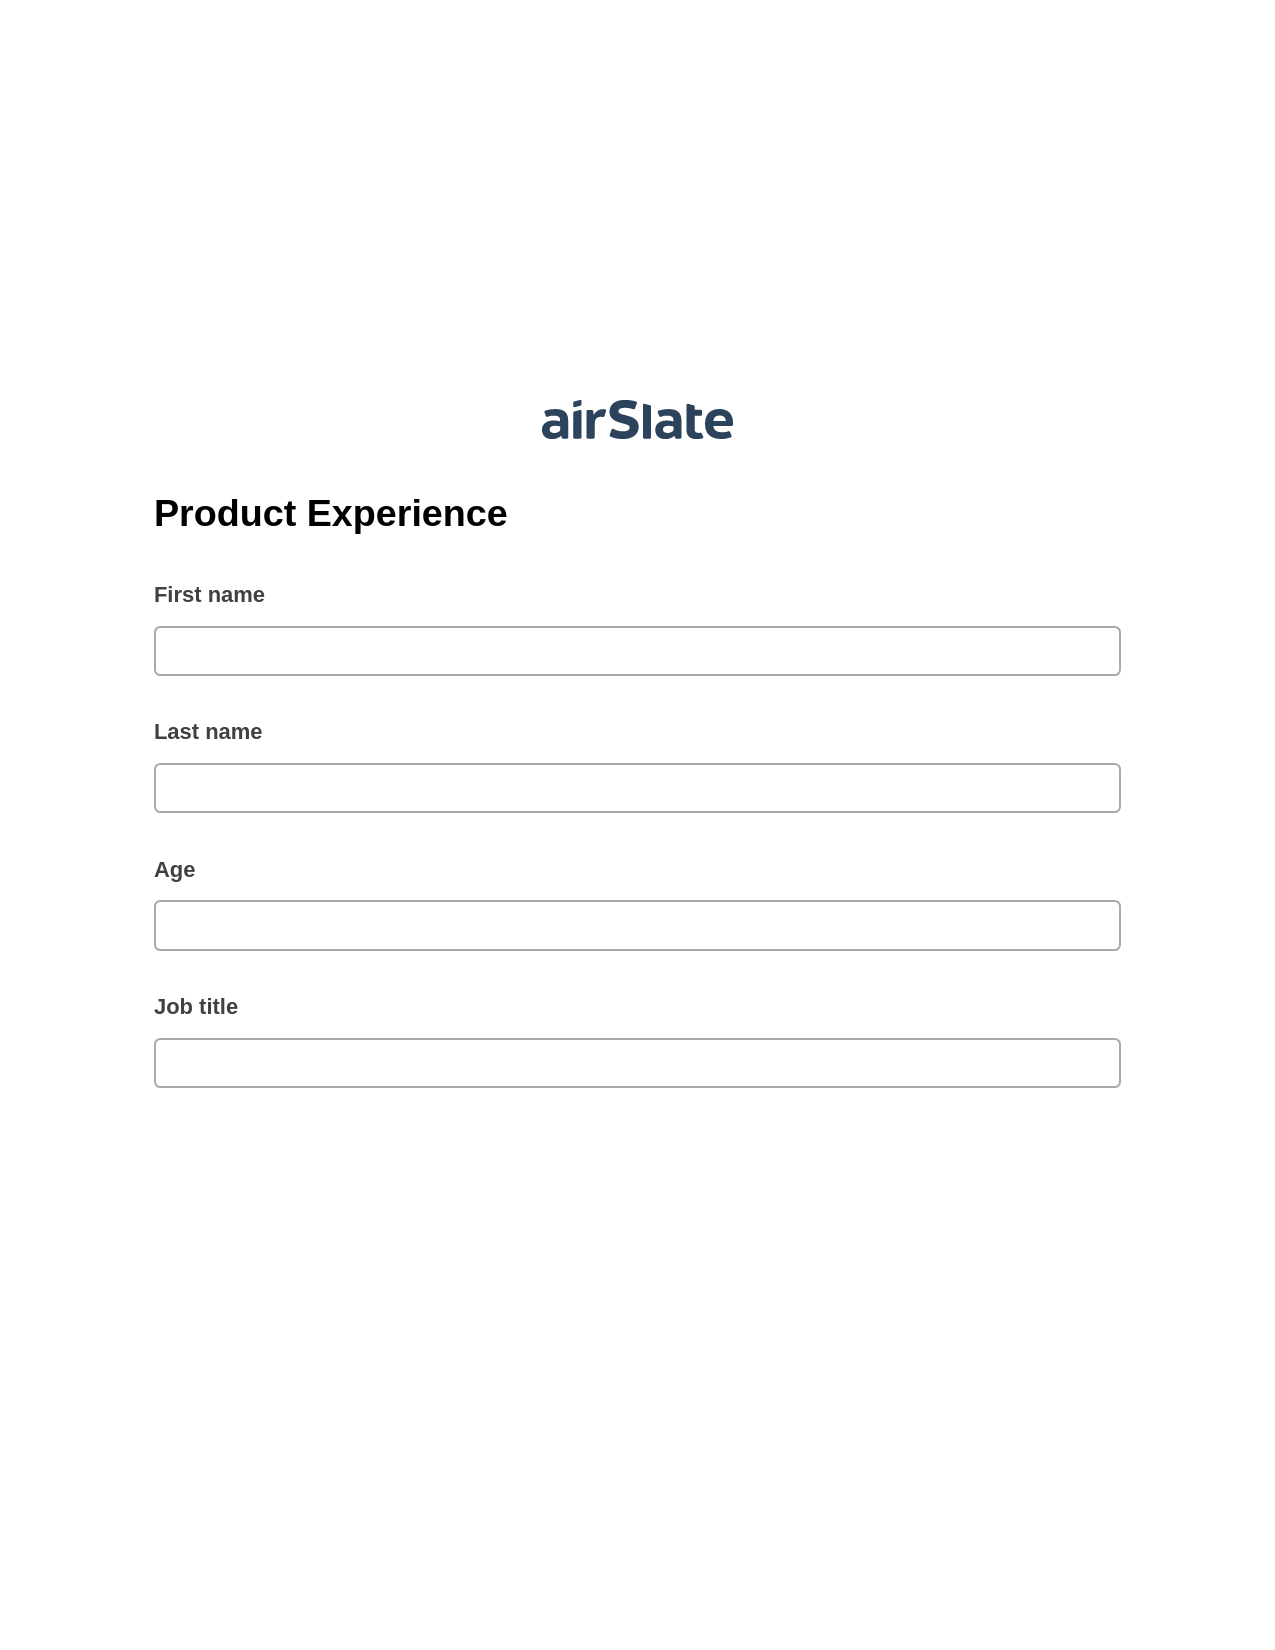 Product Experience Pre-fill from CSV File Bot, Slack Notification Bot, Post-finish Document Bot